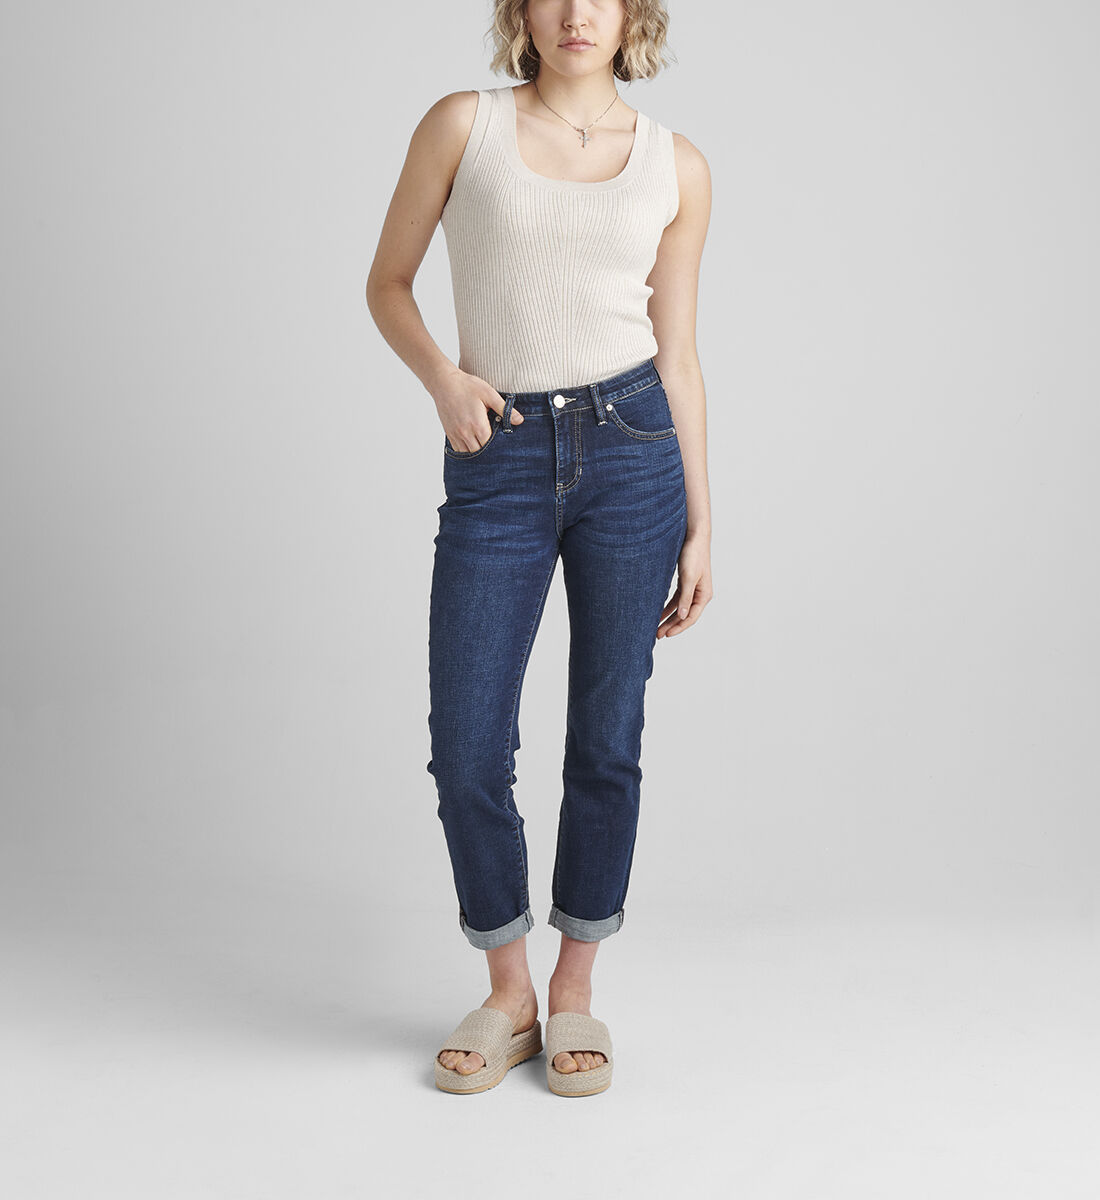 Carter Mid Rise Girlfriend Jeans Petite Front